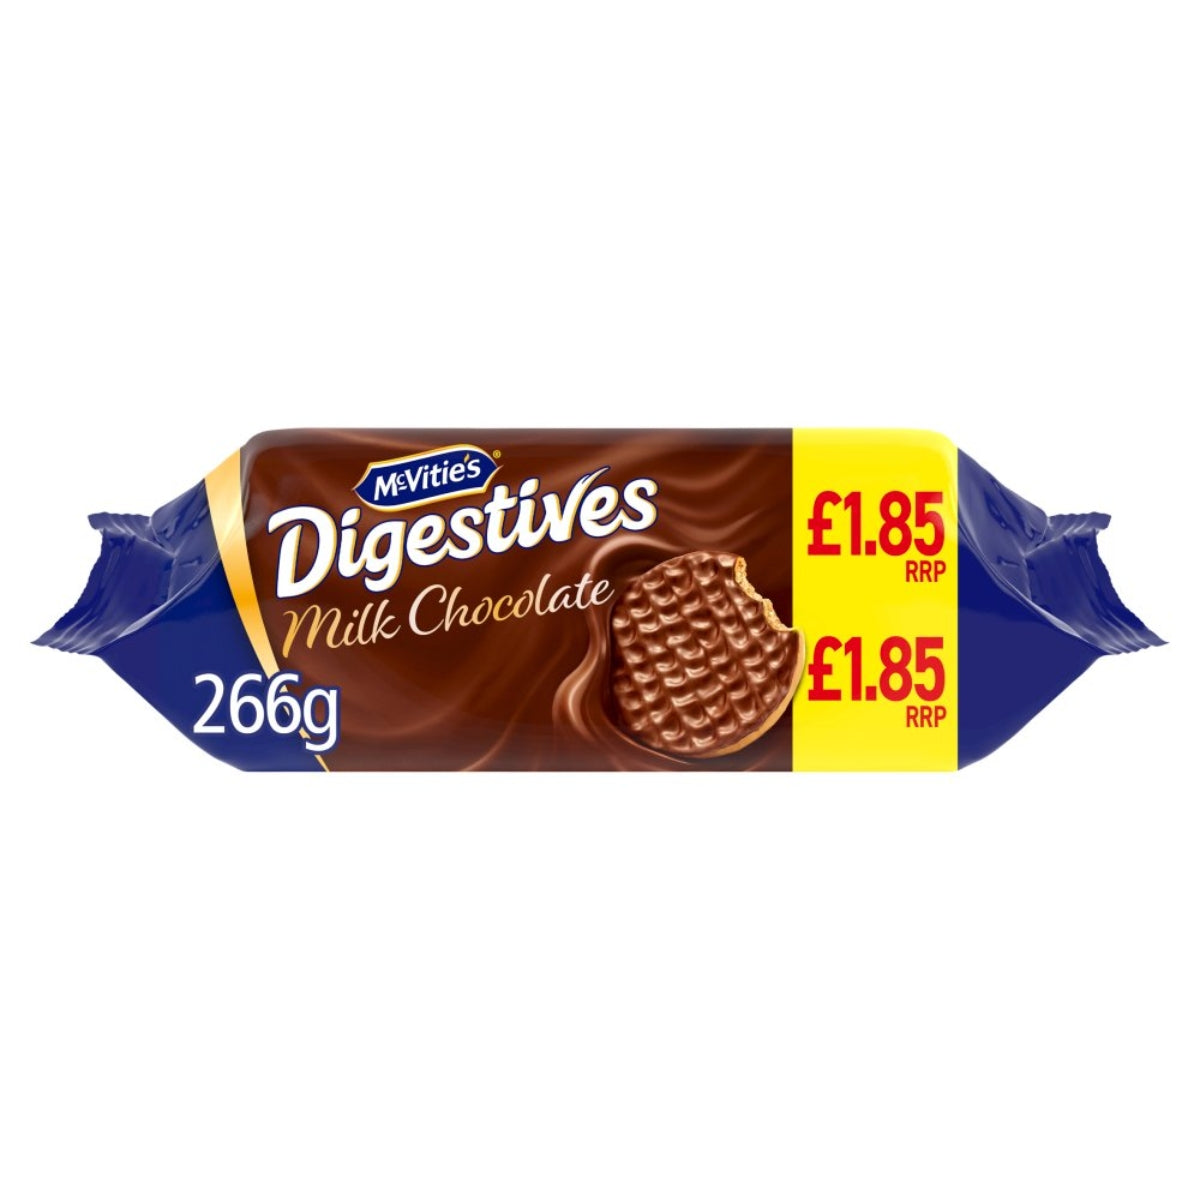 A bar of Mcvities - Digestive Milk Chocolate - 266g on a white background.